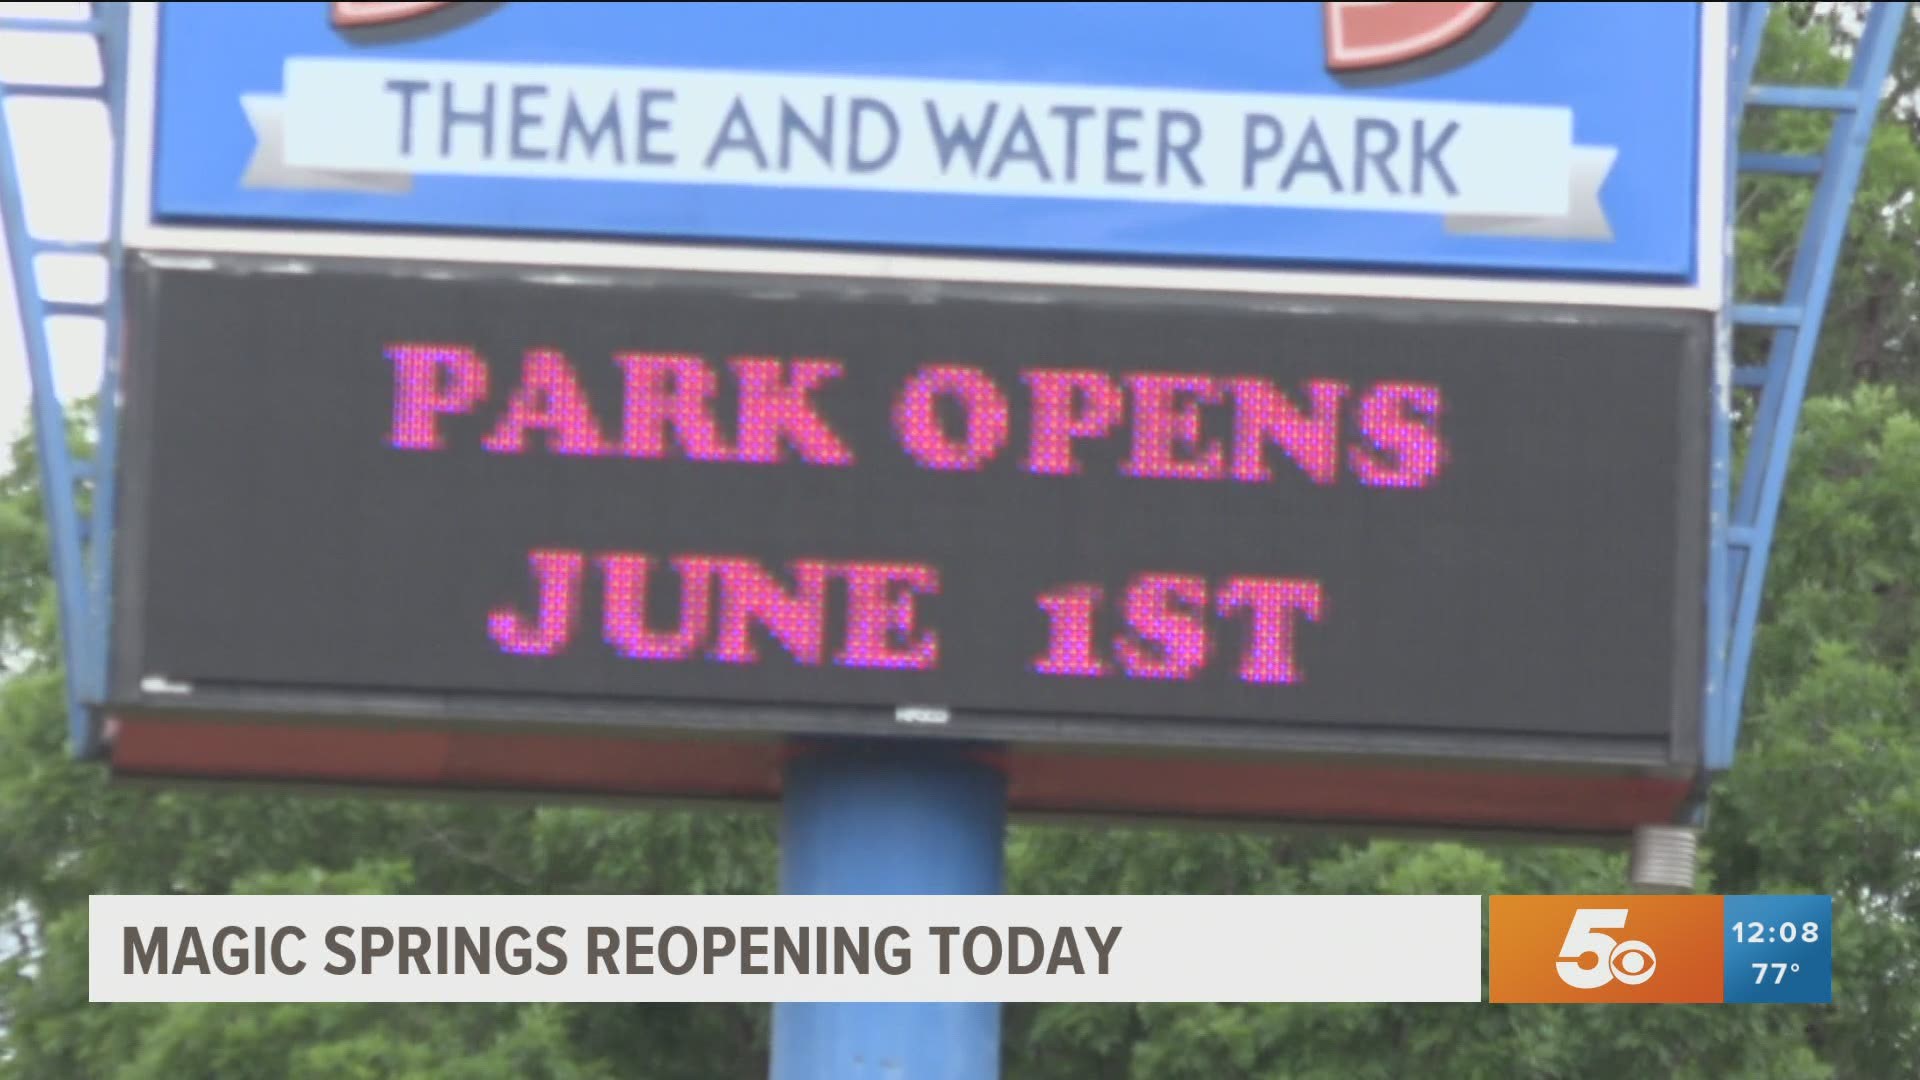 The Hot Springs theme and water park is ready for summer and opening at 50% capacity.